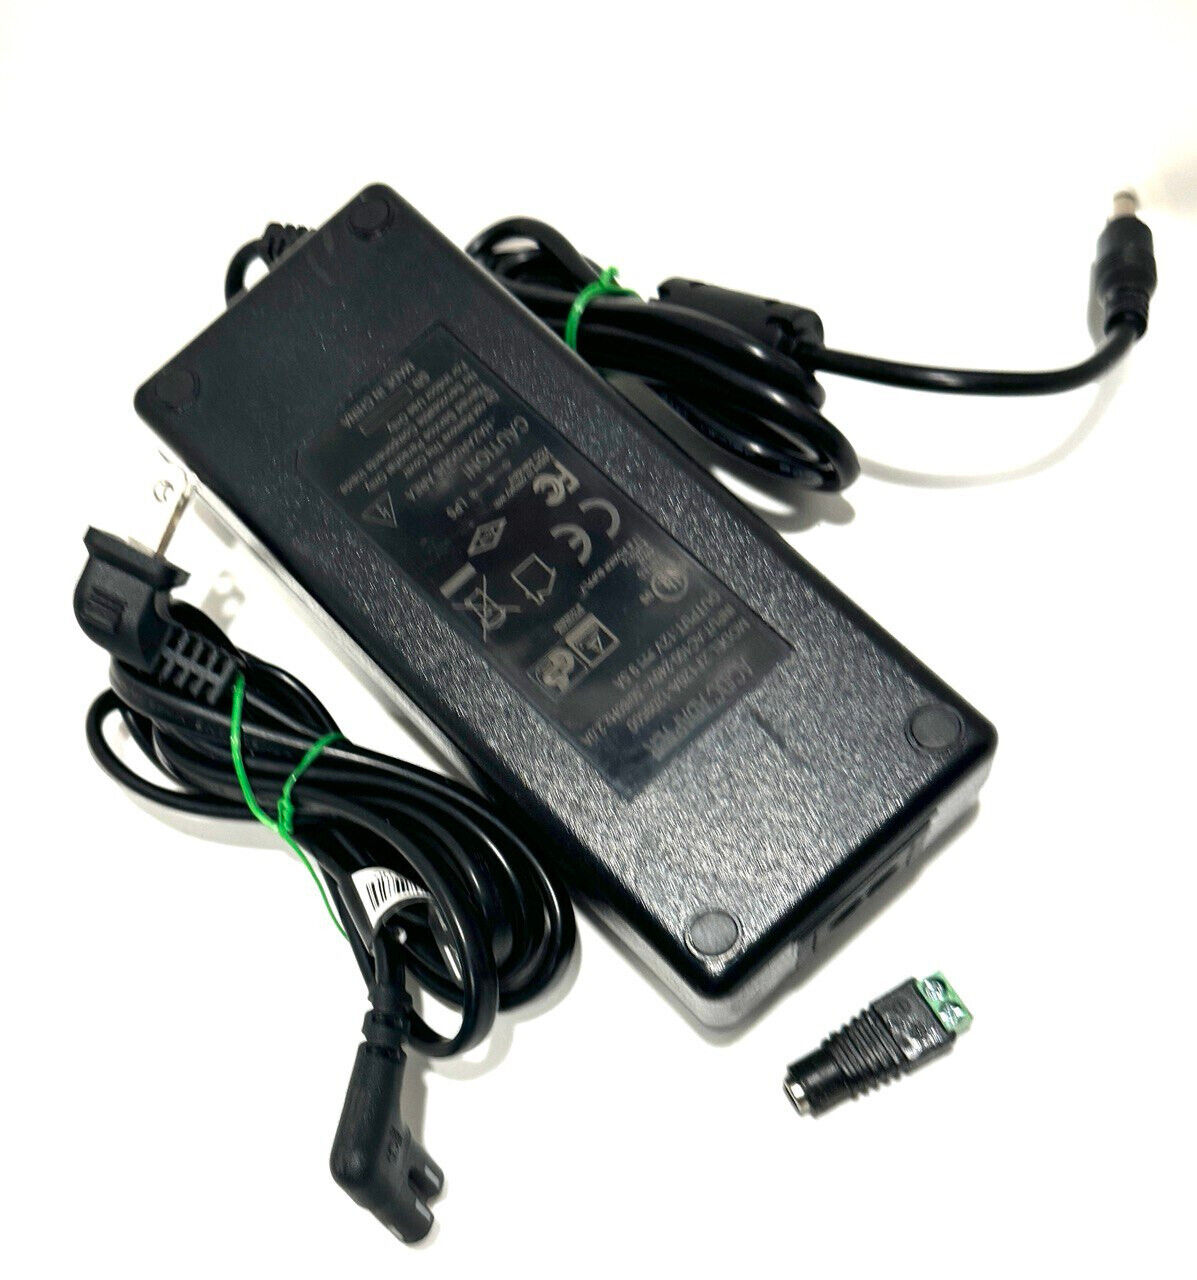 AC/DC Adapter ZF120A-1209500 Input AC 100-240V Output 12V 9.5A - INDOOR USE ONLY